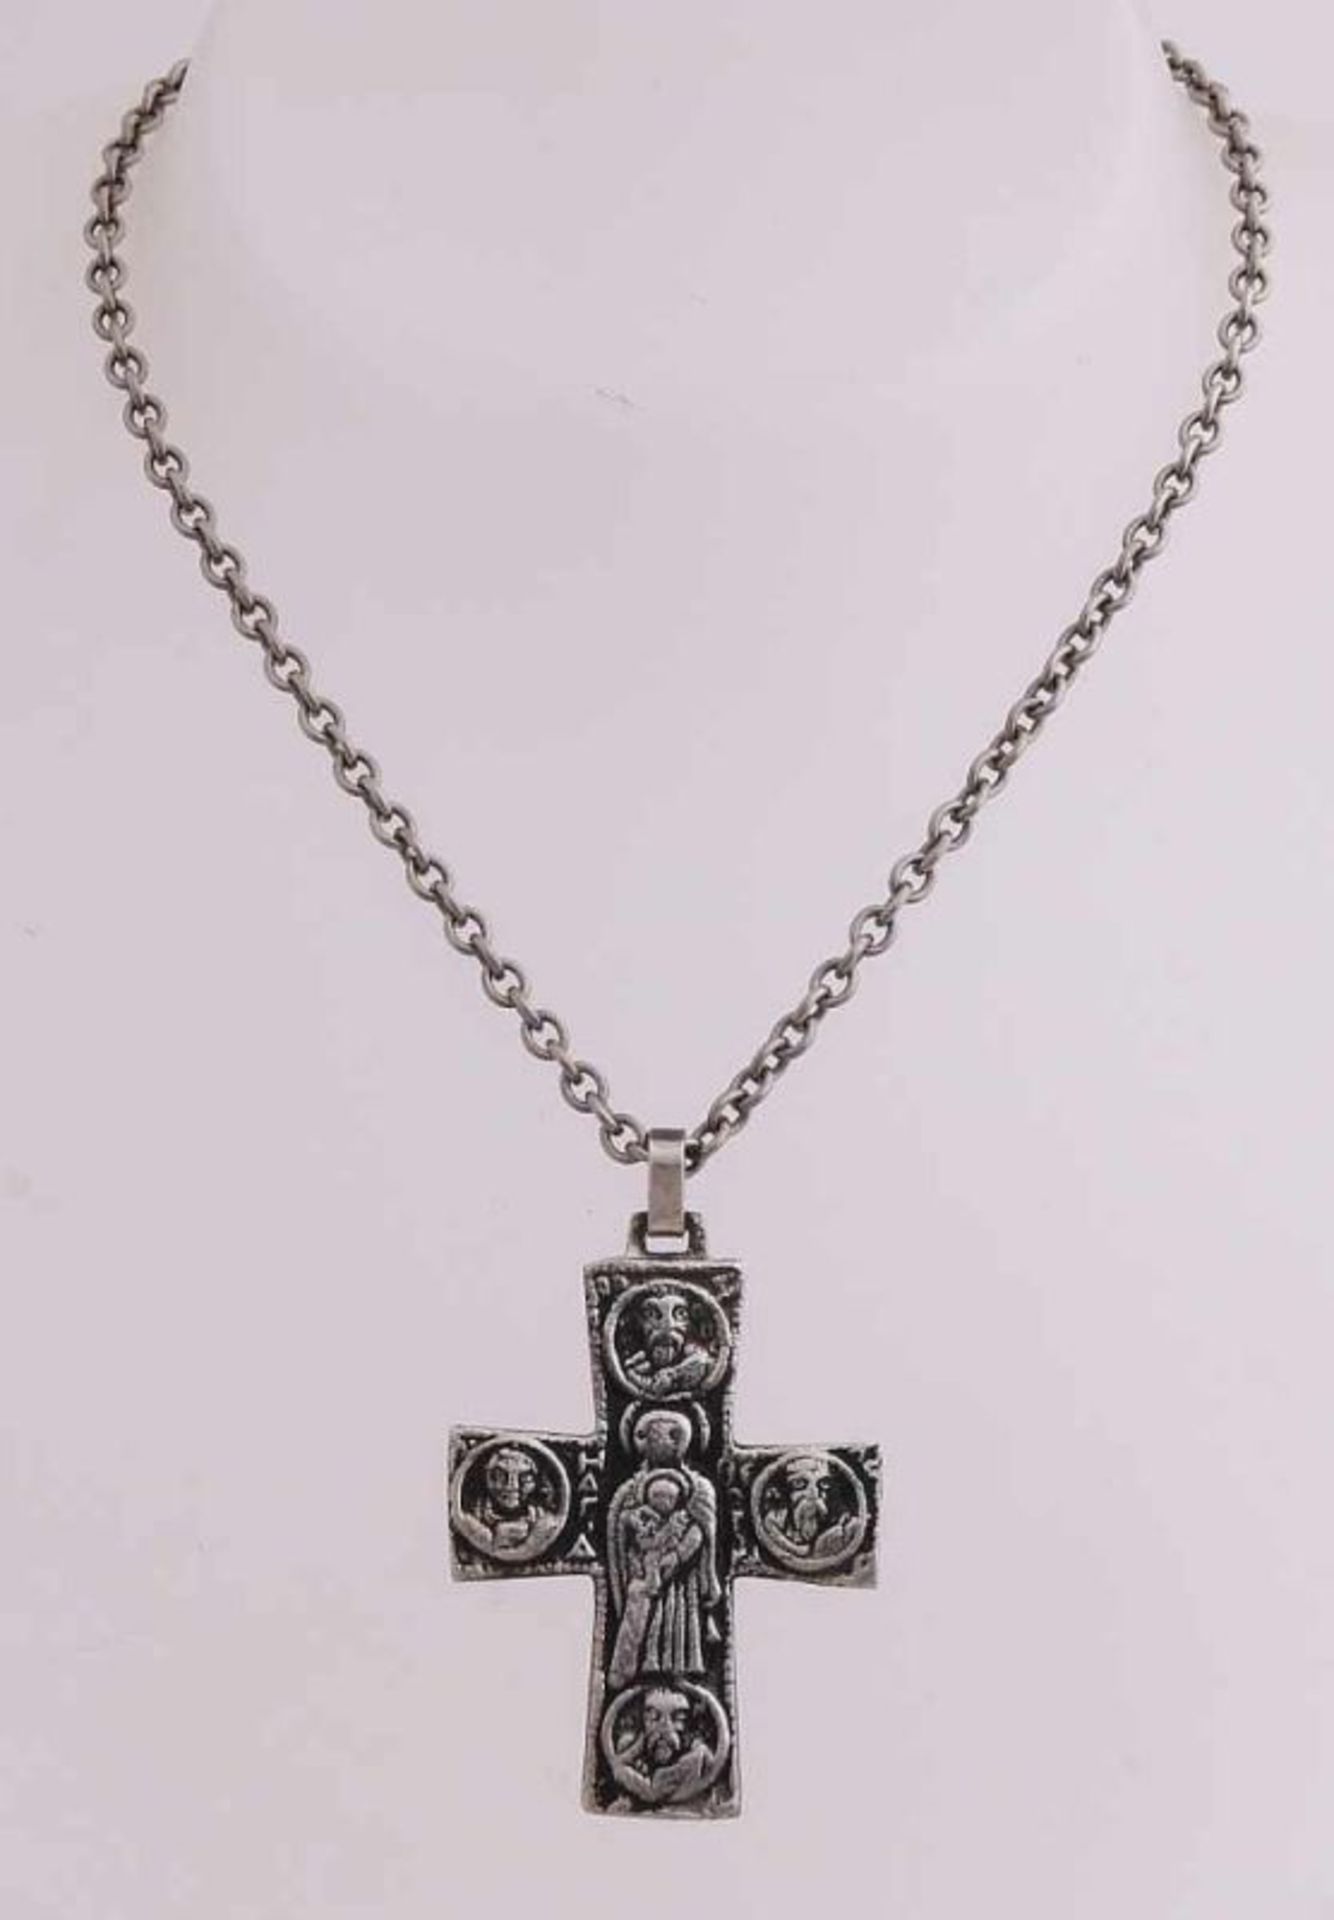 Silver necklace and pendant, 800/000, anchor necklace with it a pendant in the shape of a cross with